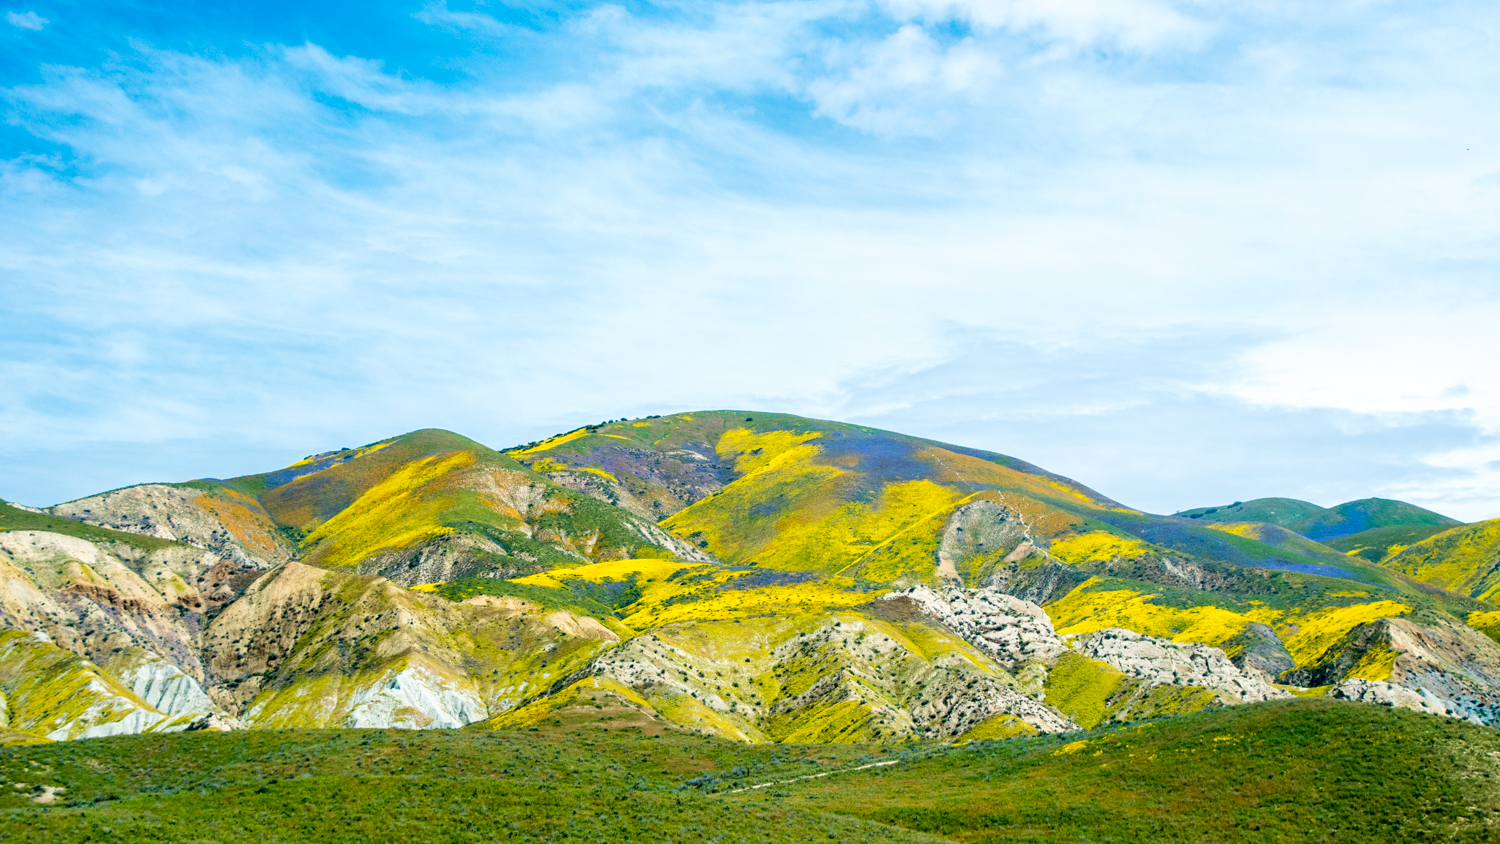 Wildflowers in bloom at Carrizo Plain in springtime. Photo: Douglas Croft / BLM